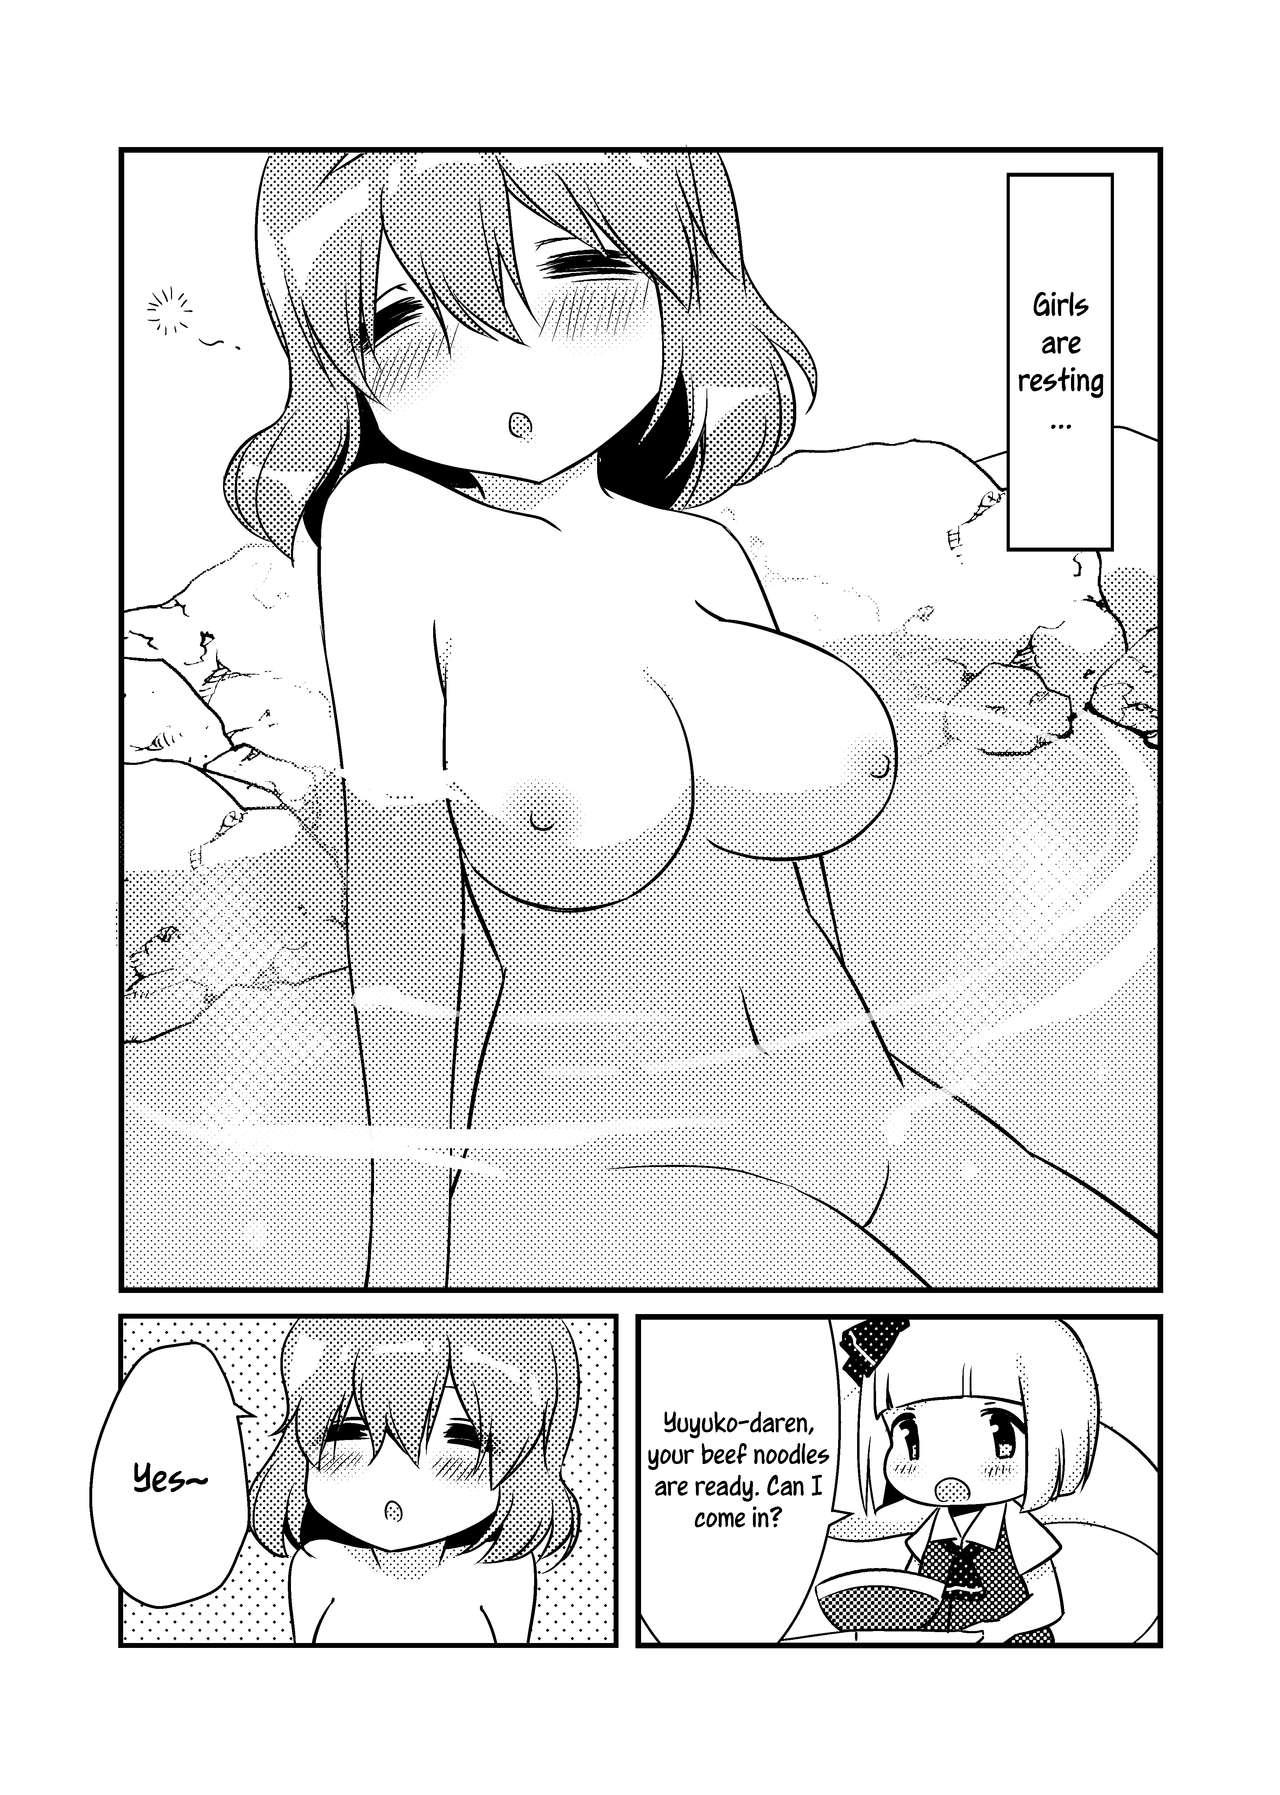 Mistress ????一起泡温泉吧！ | ????Let's Soak in the Hot Spring! - Touhou project Best Blowjobs Ever - Page 3